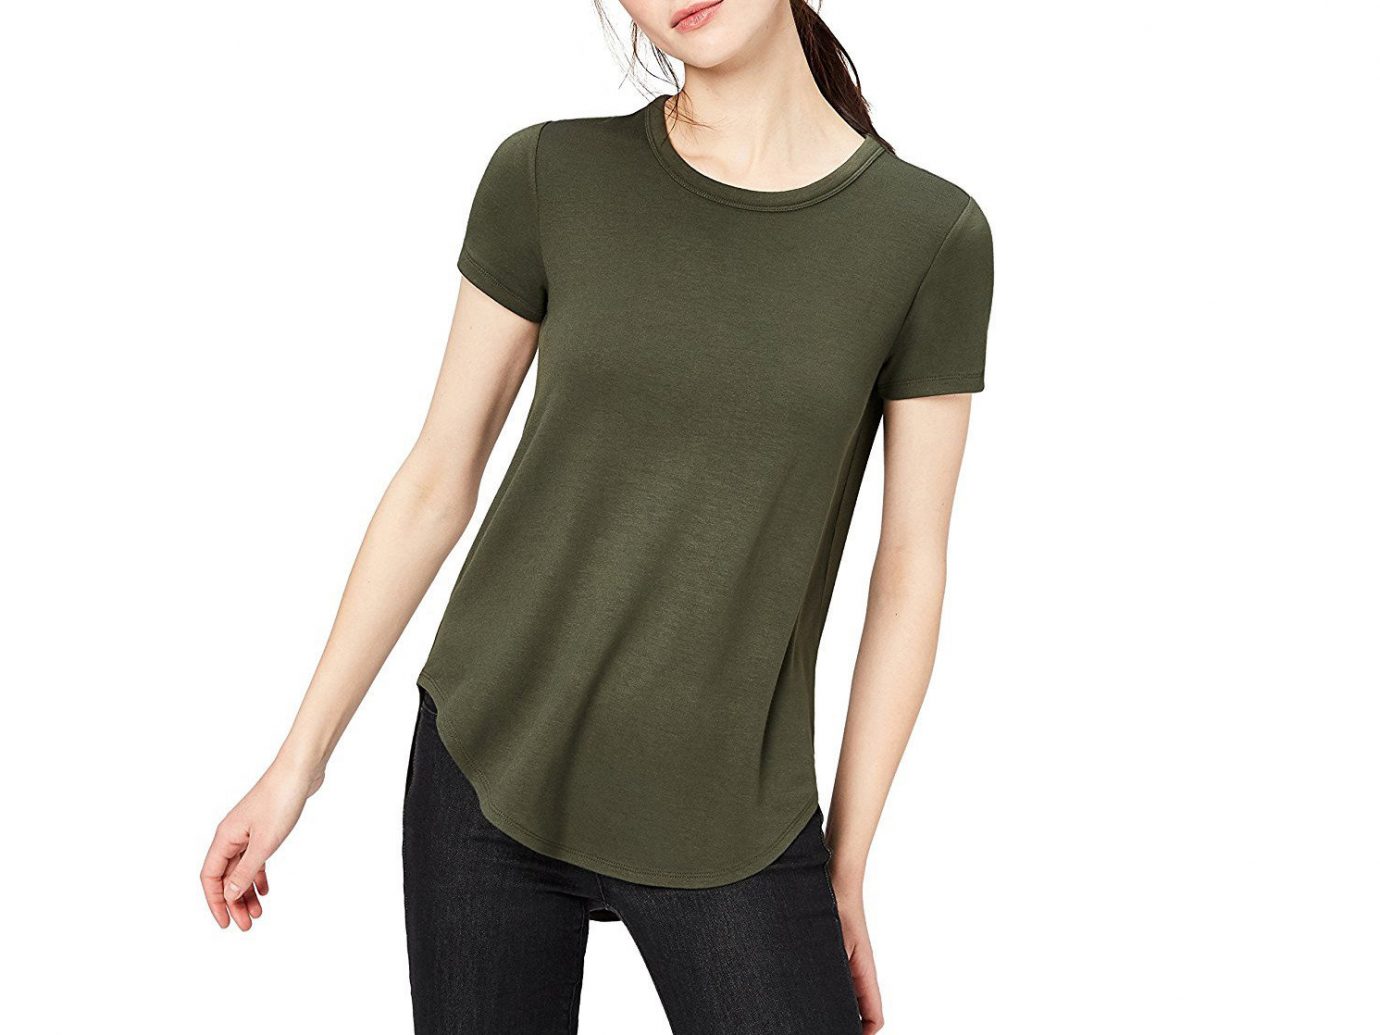 Packing Tips Style + Design Travel Shop person clothing sleeve shoulder neck t shirt long sleeved t shirt posing arm joint